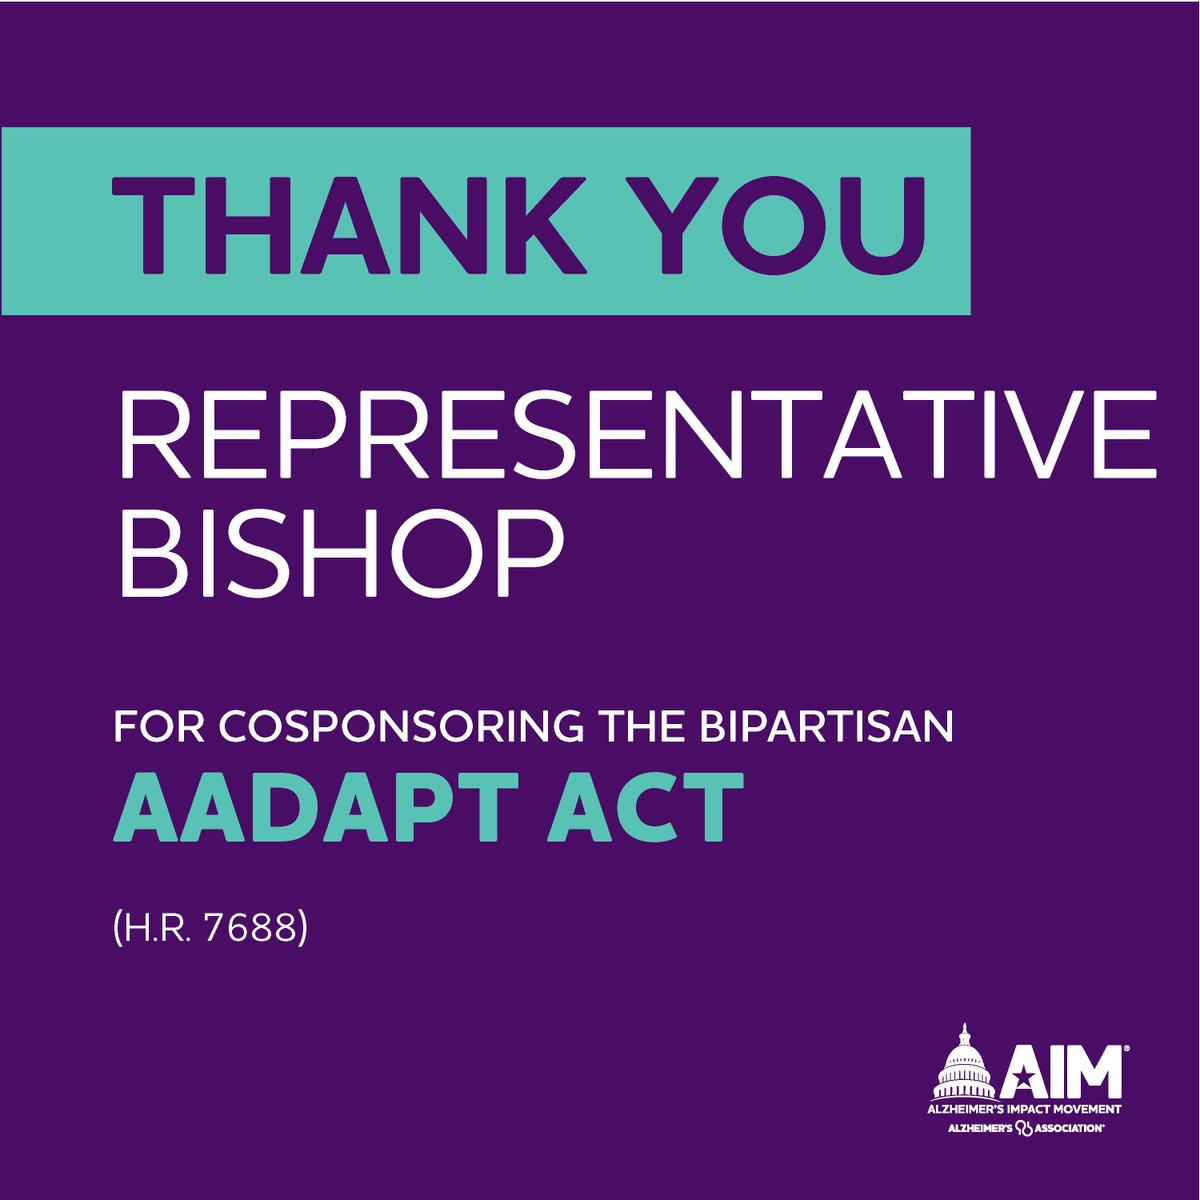 Thank you, @SanfordBishop, for improving dementia training and education for primary care providers by cosponsoring the #AADAPTAct.